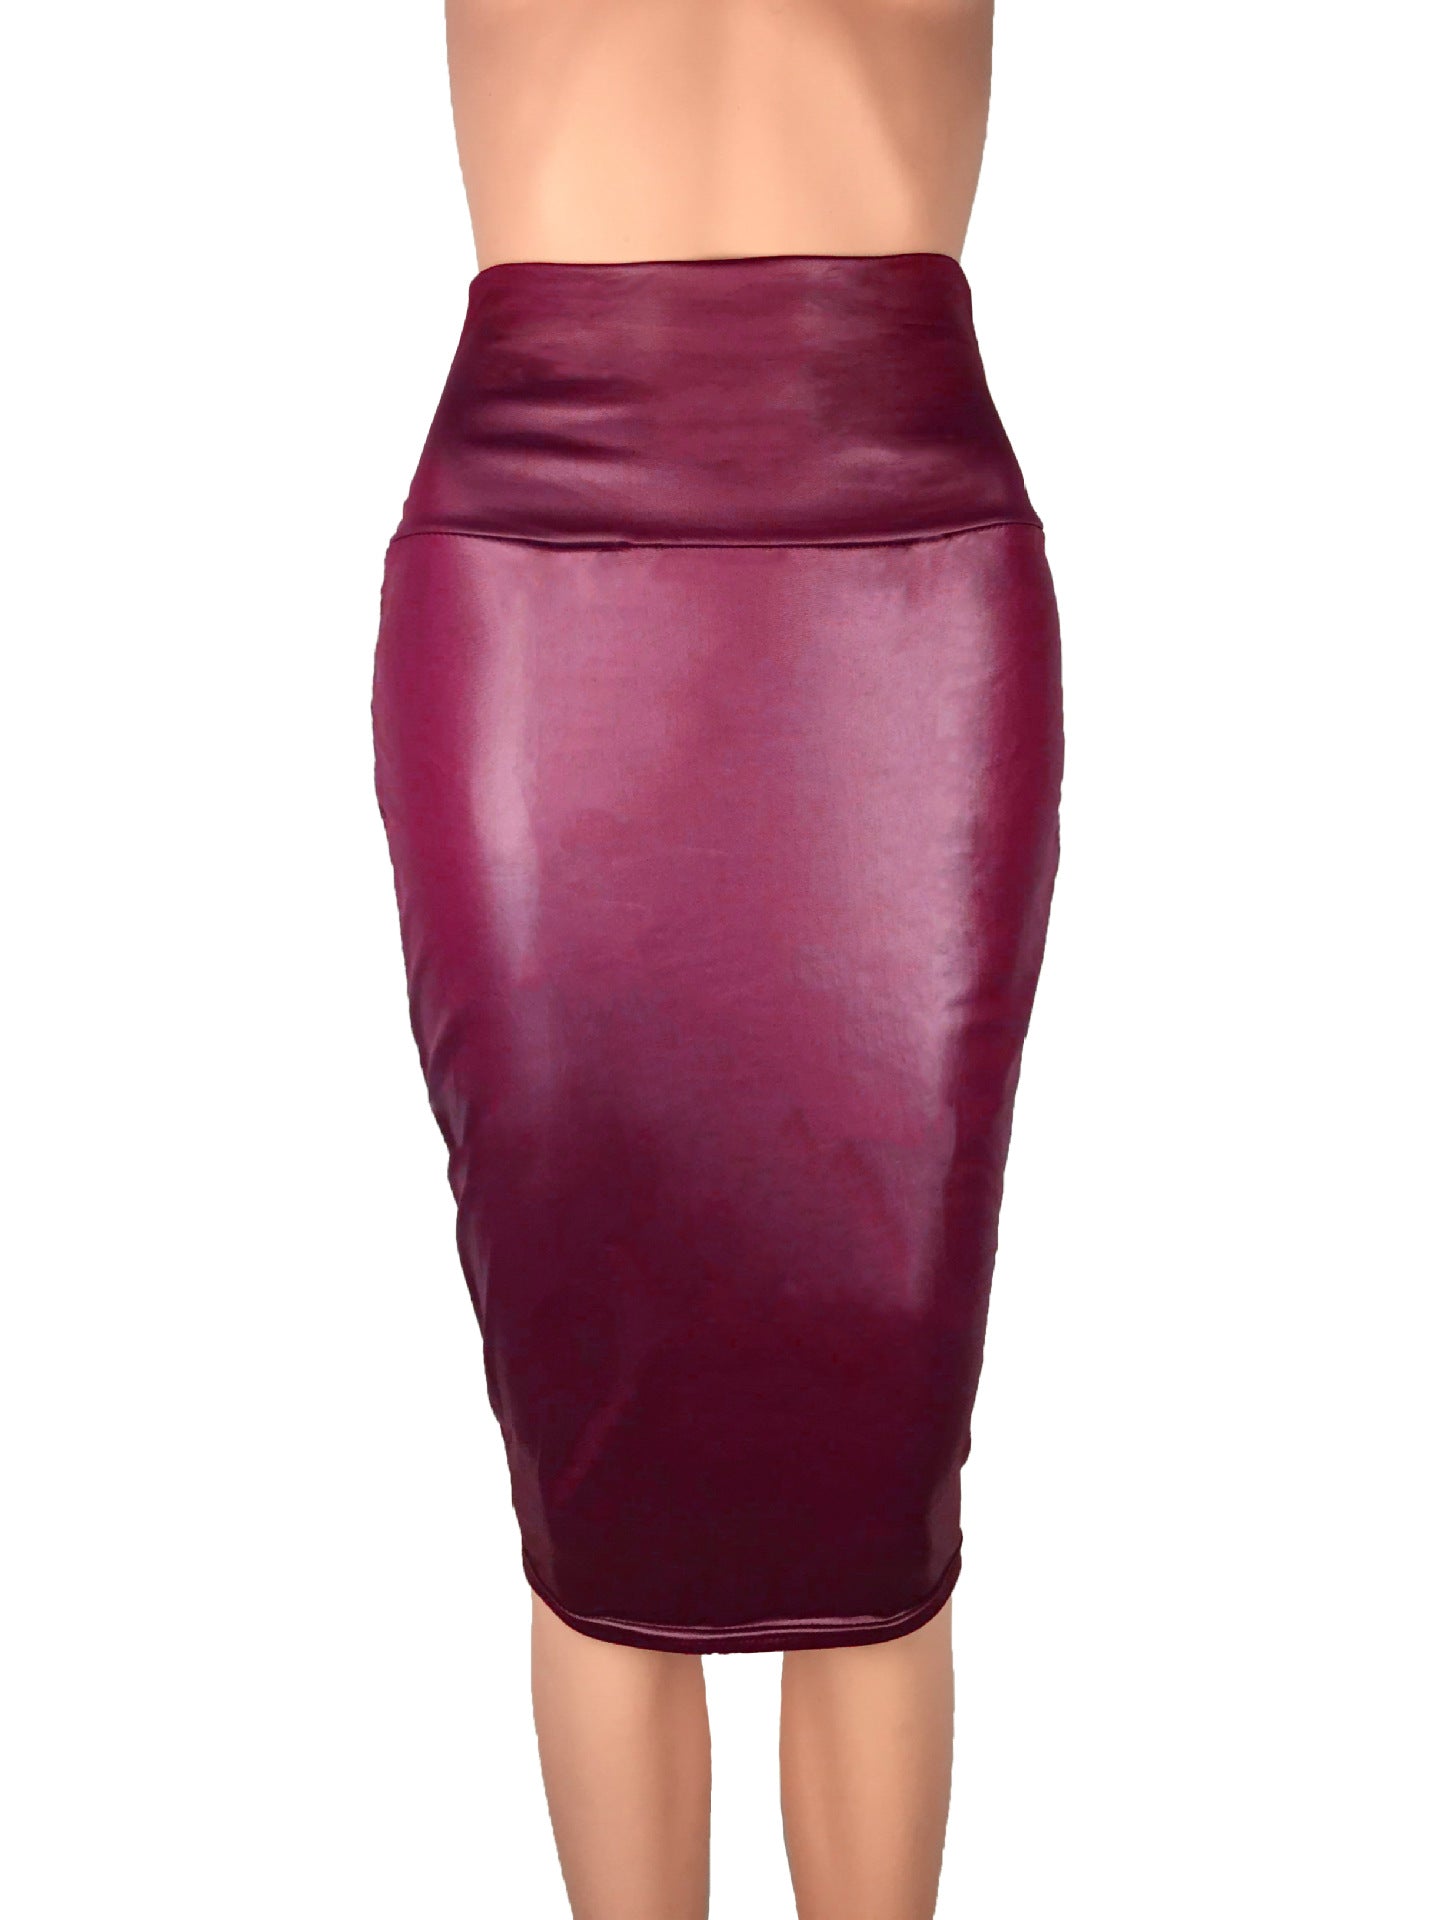 Sinners Pencil Skirt, Free Products, Fashion Sinners